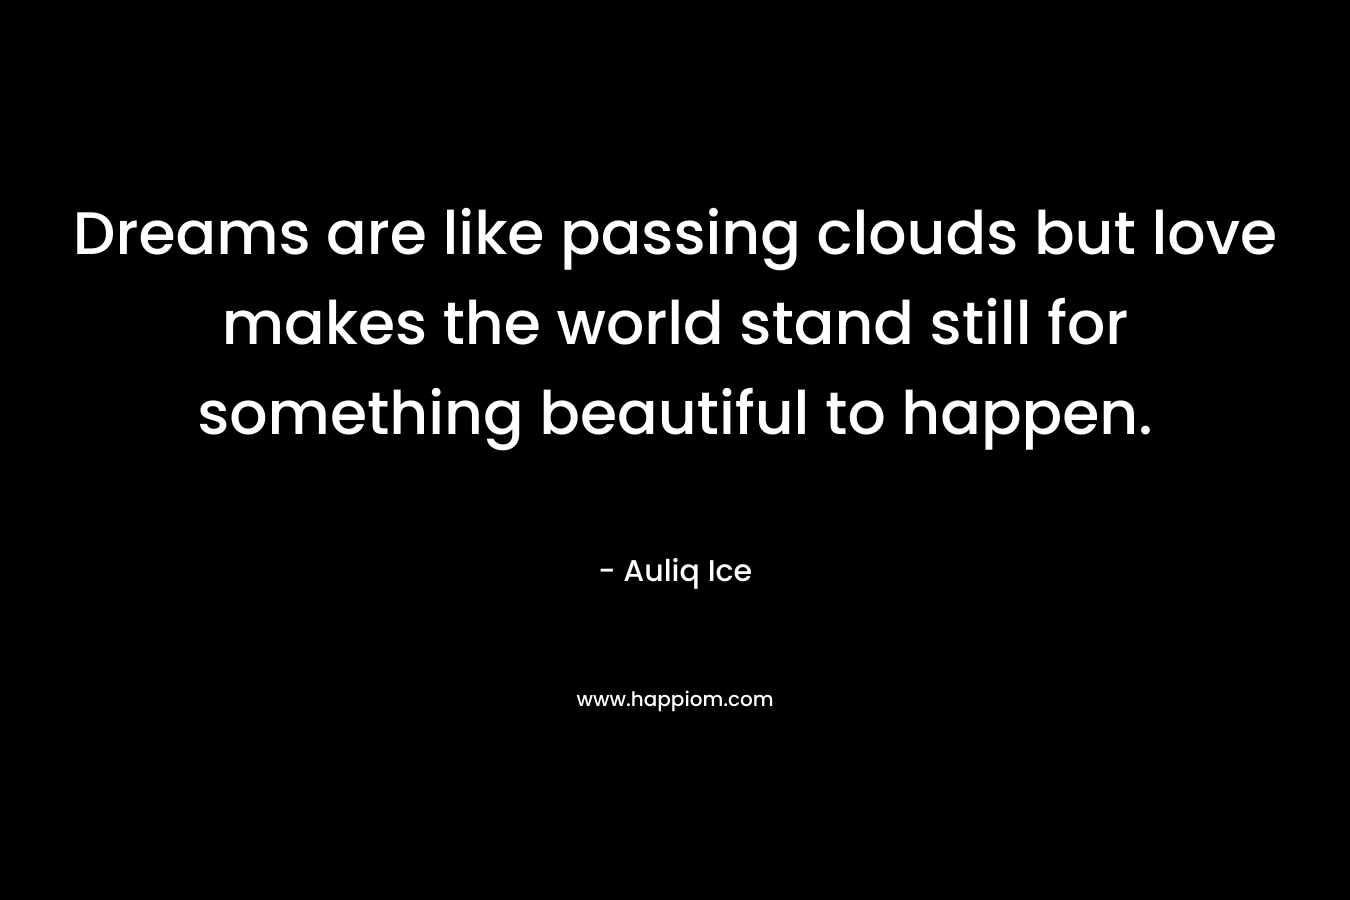 Dreams are like passing clouds but love makes the world stand still for something beautiful to happen.